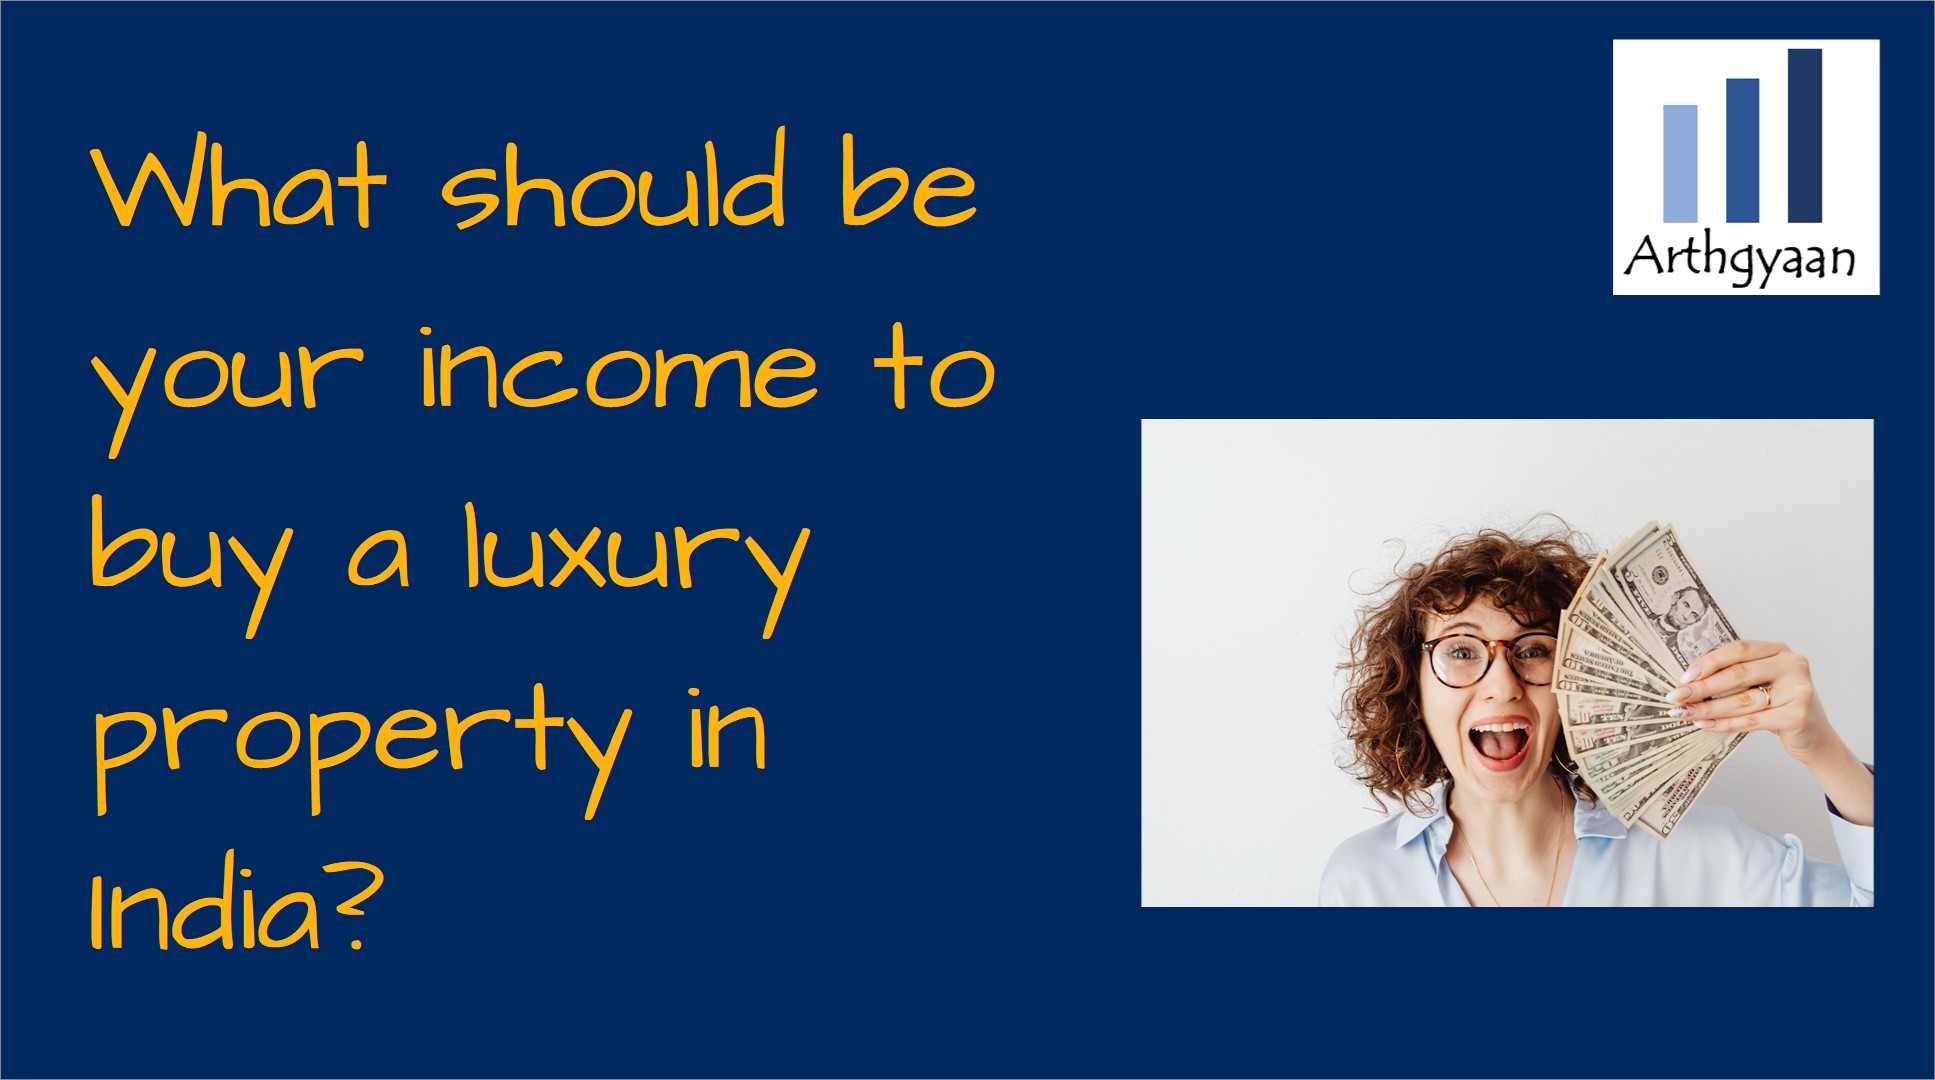 What should be your income to buy a luxury property in India?